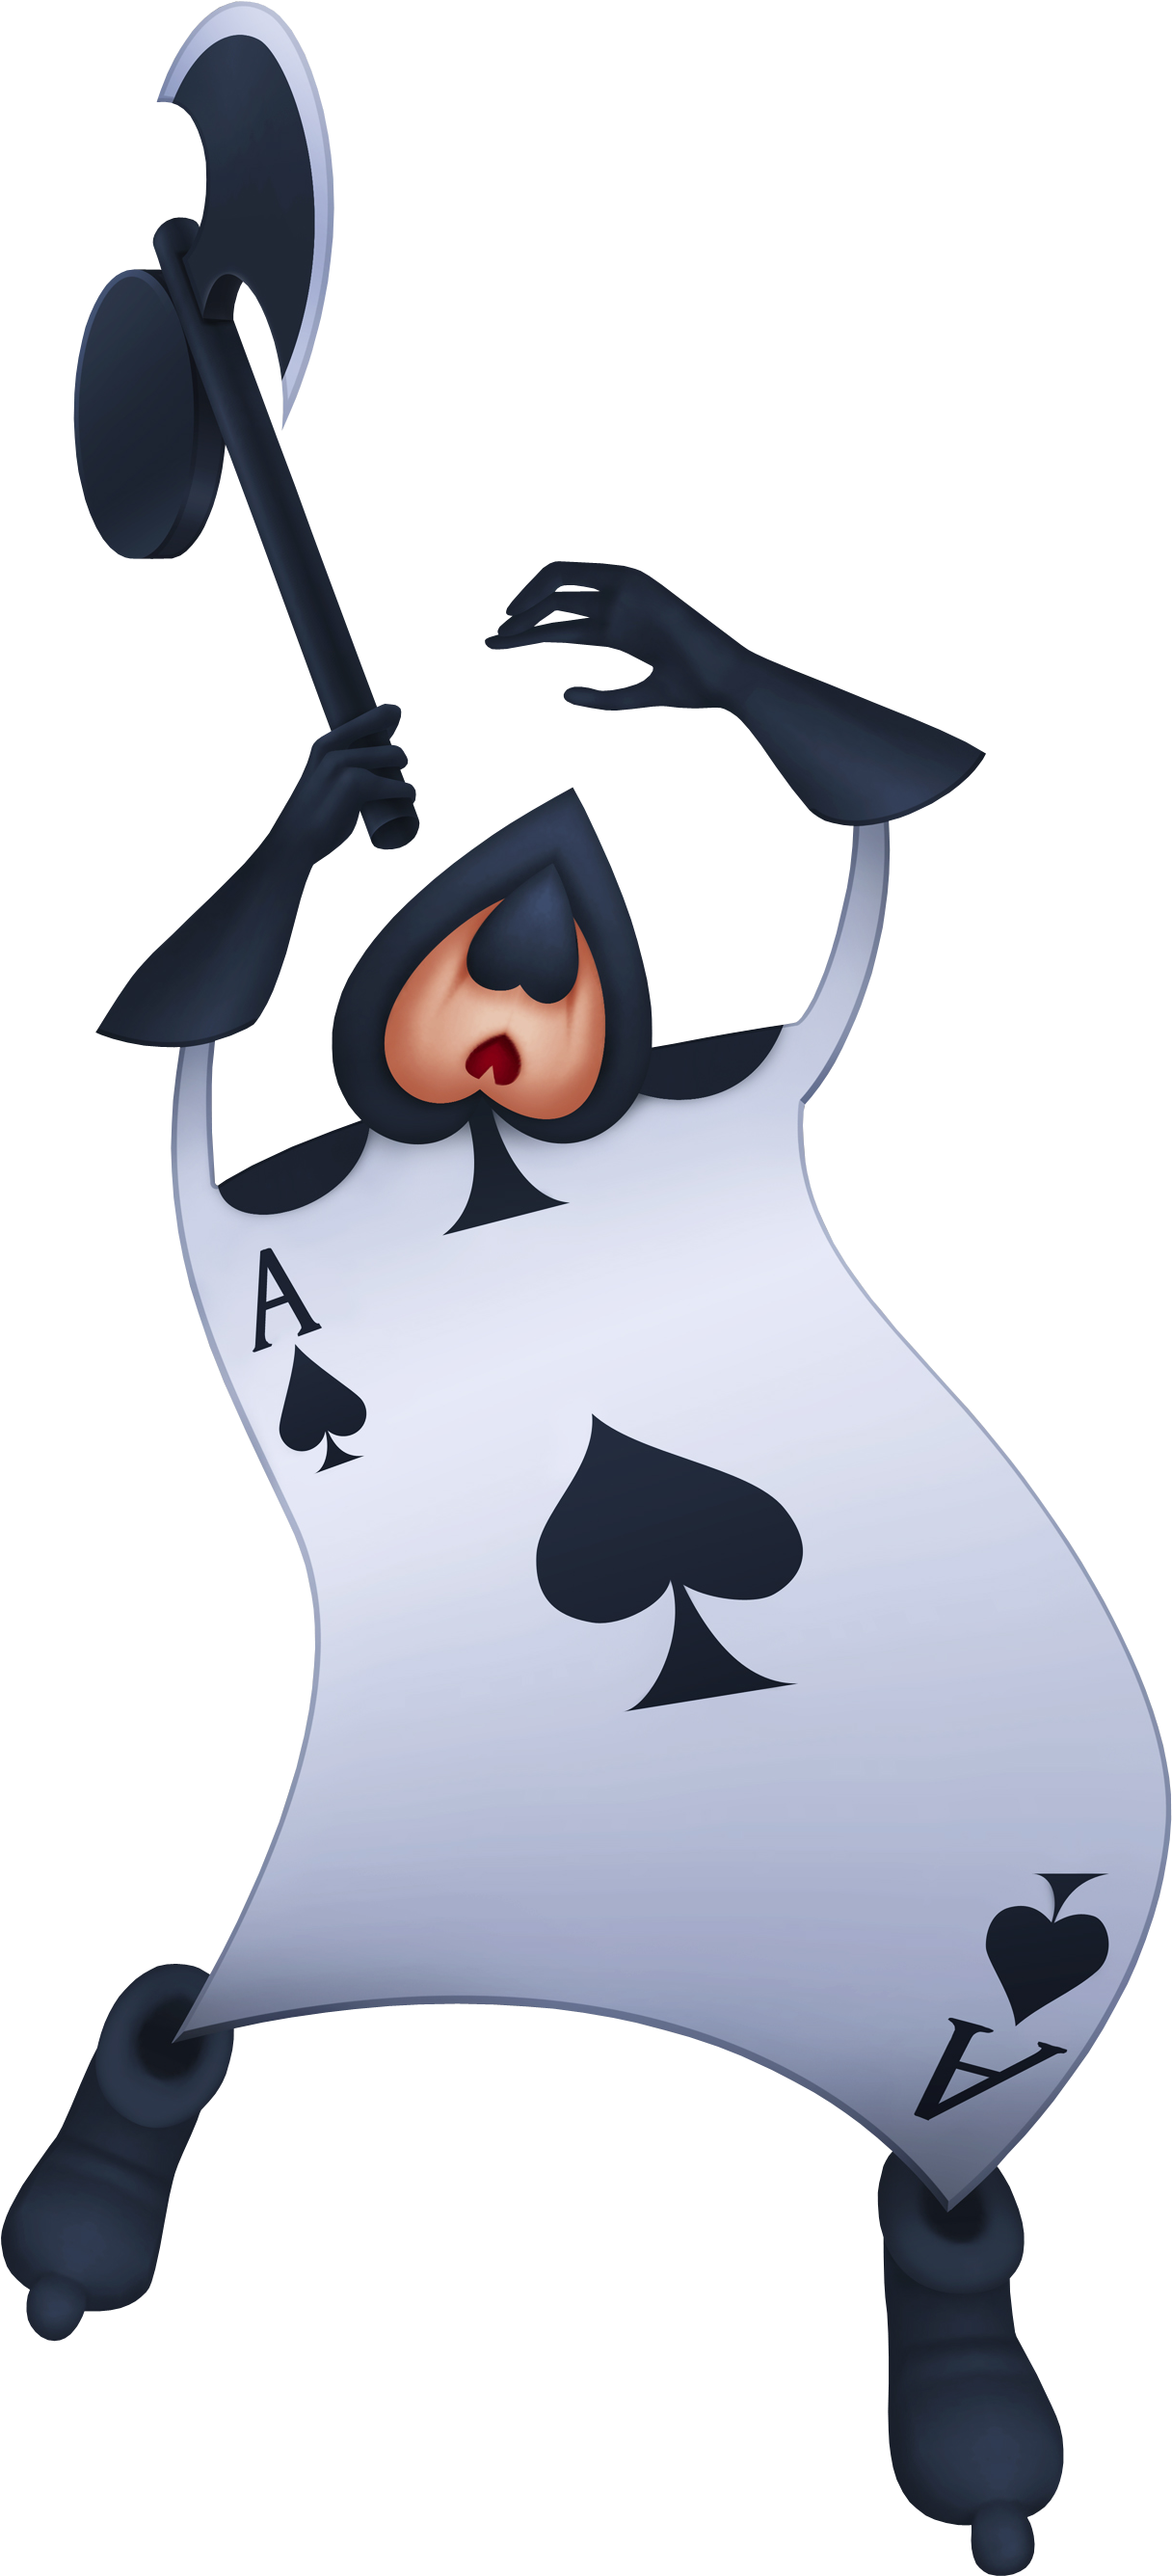 Alice In Wonderland Cartoon Characters All Images Are - Spades Alice In Wonderland (1904x2868)